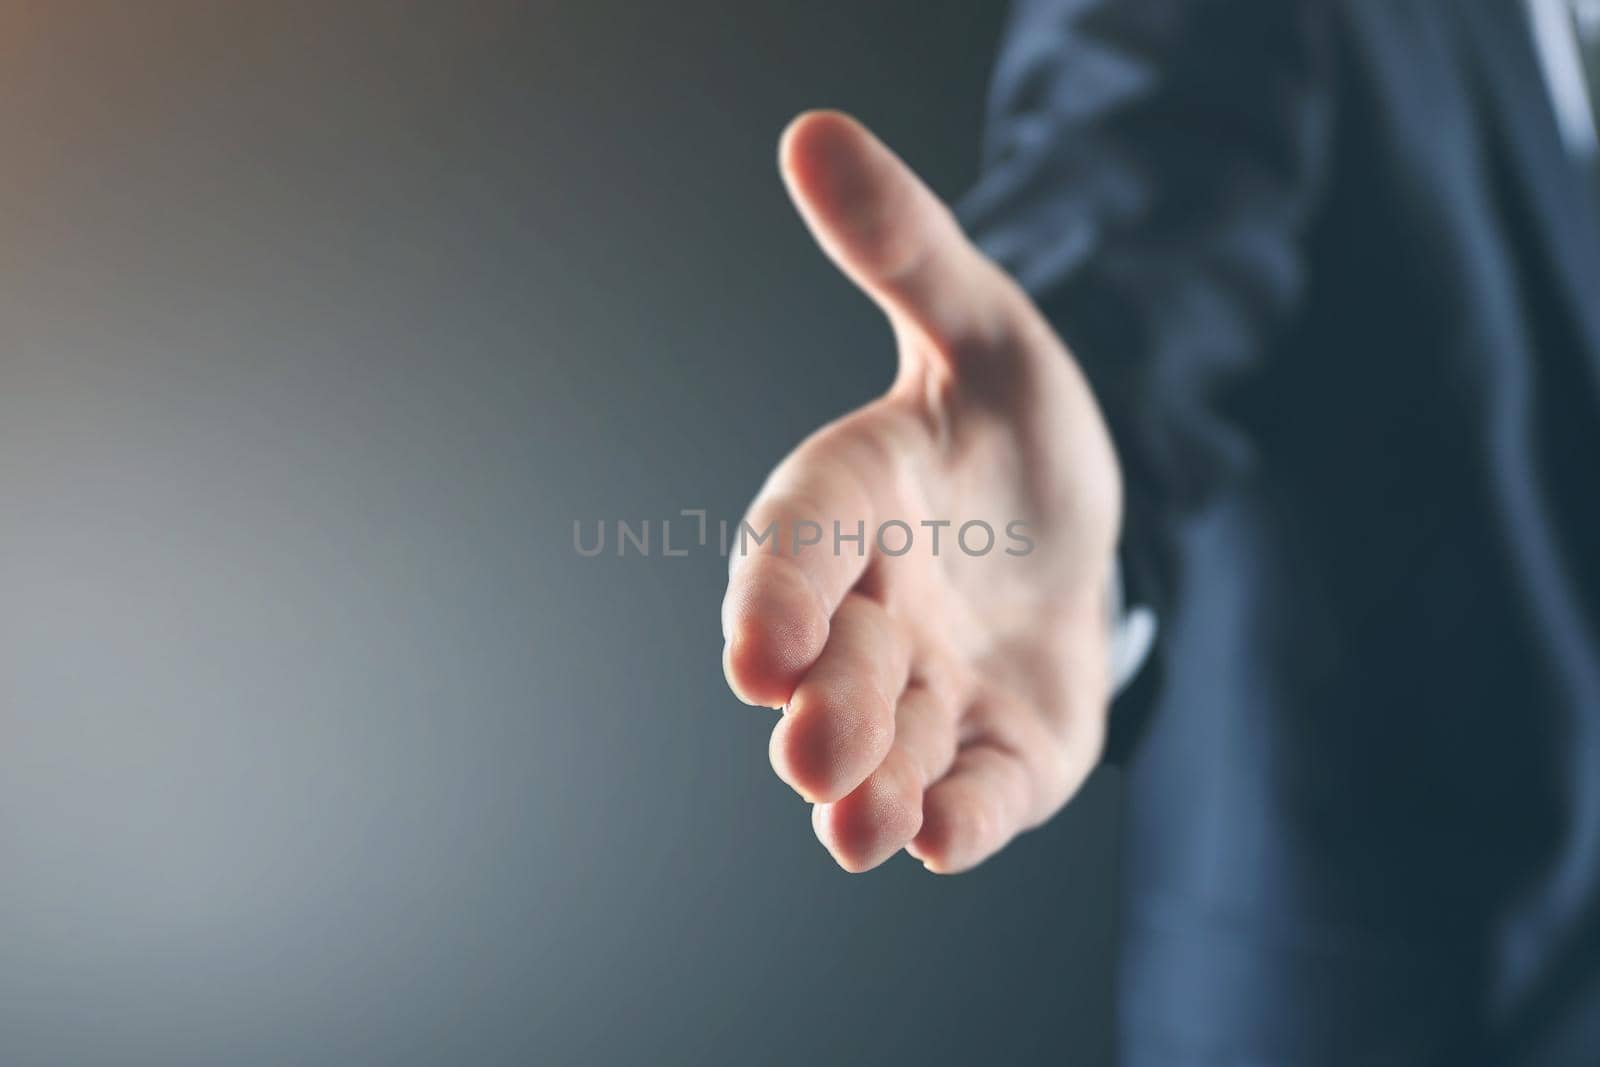 Business man with an open palm ready to strike a deal on a black background